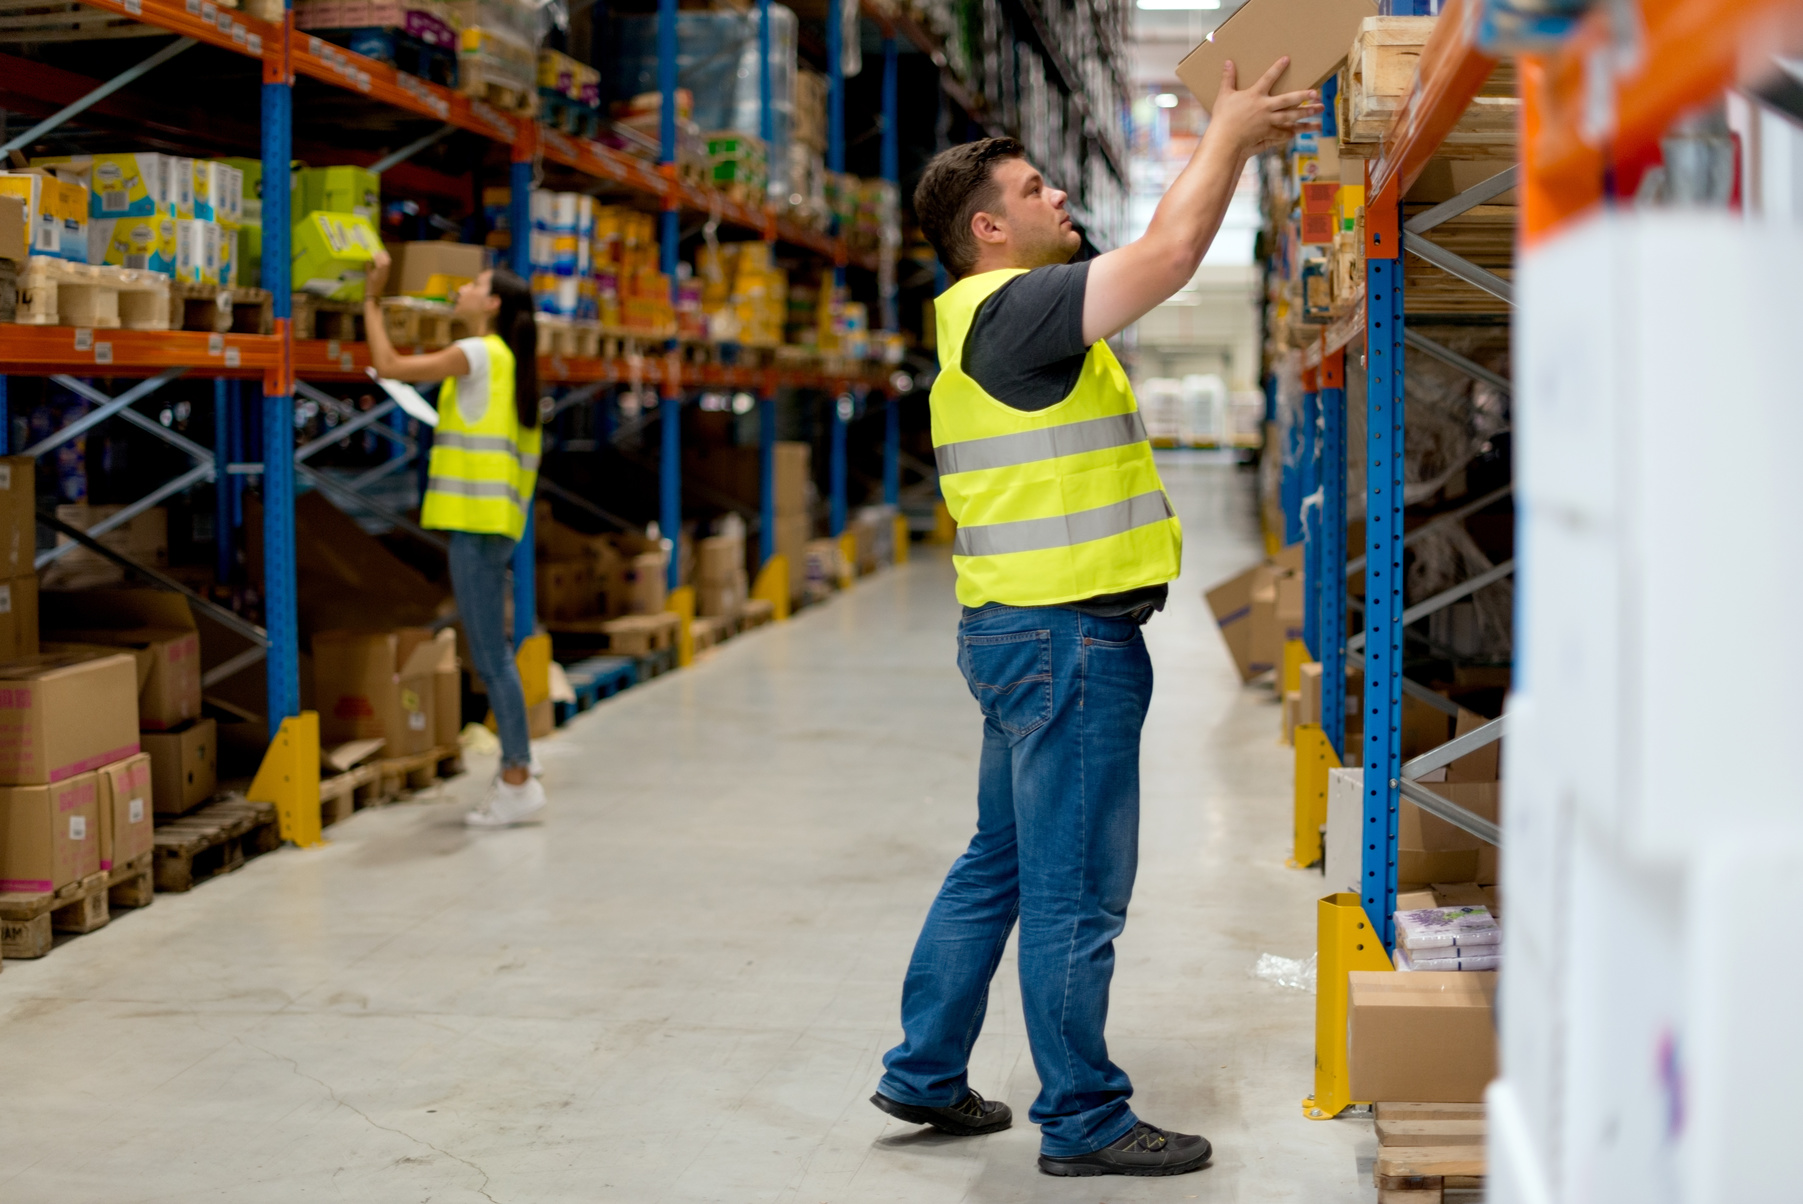 How to Write a Great Warehouse Worker Job Description